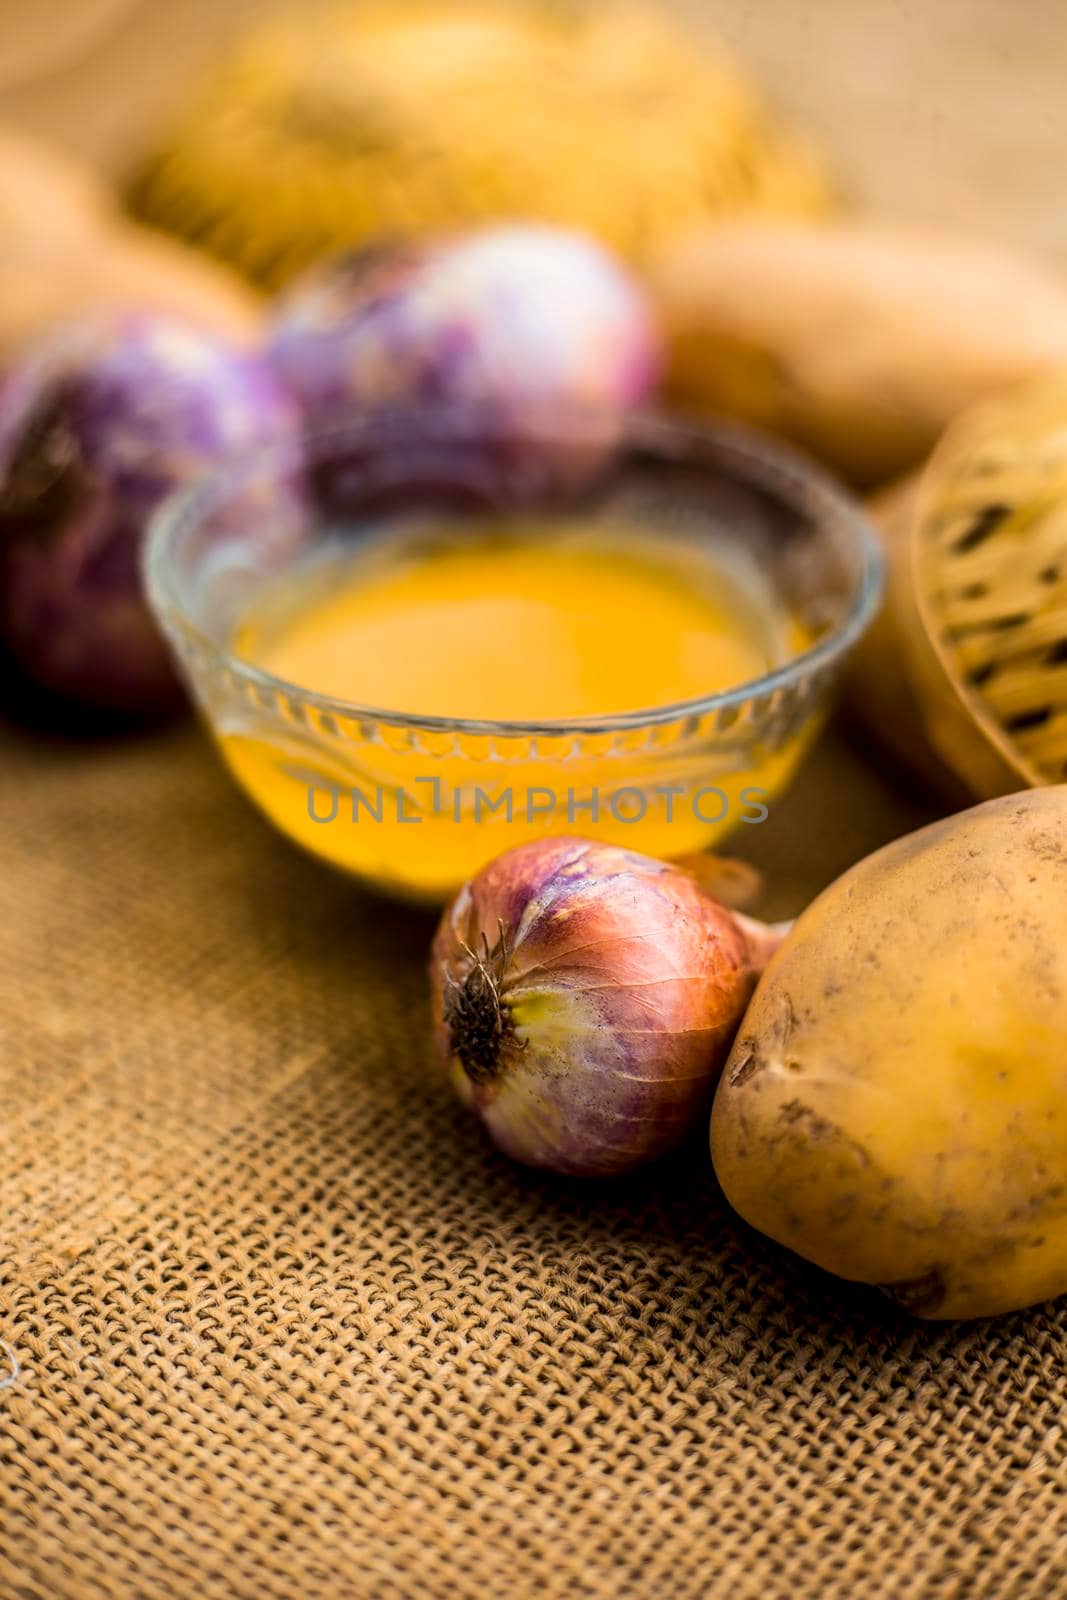 Best earth growth-boosting potion consisting of ingredients which are potato juice and onion juice in a glass bowl along with raw potato and onion on the surface.